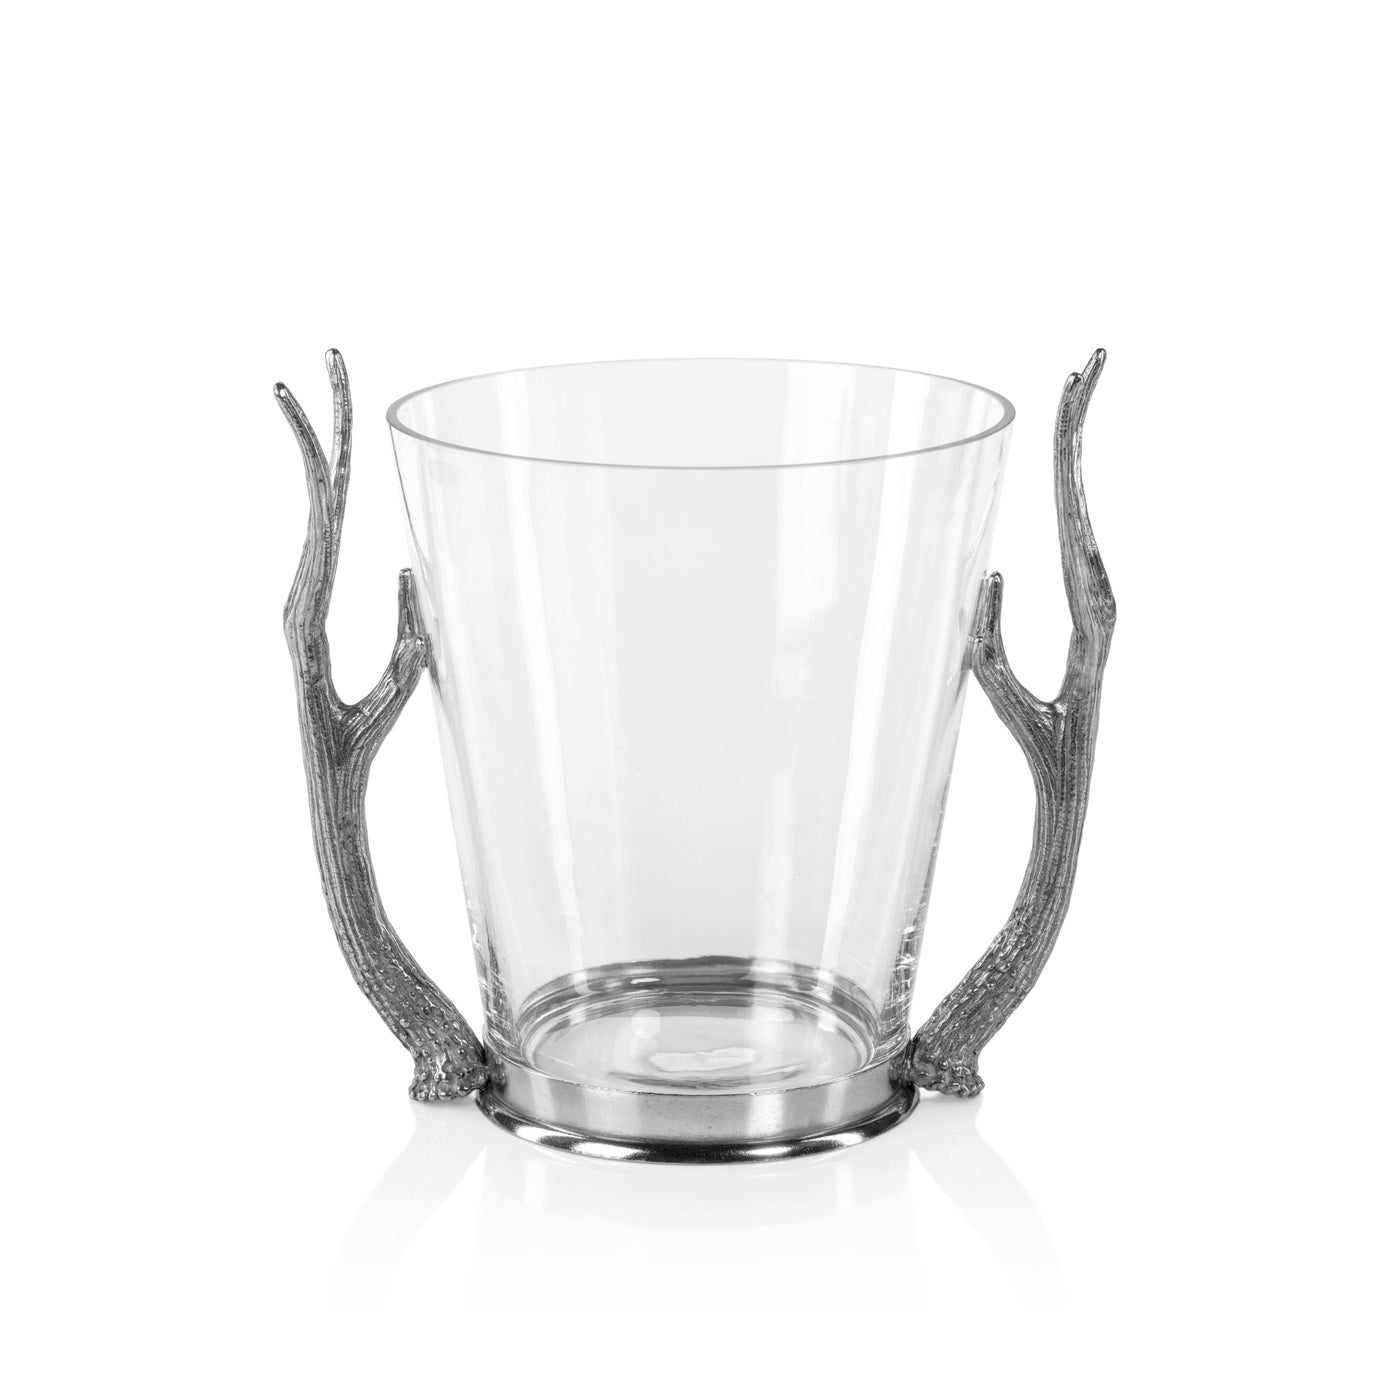 Davos Glass Wine & Champagne Bucket w/ Pewter Antler Handles-Home/Giftware-Kevin's Fine Outdoor Gear & Apparel